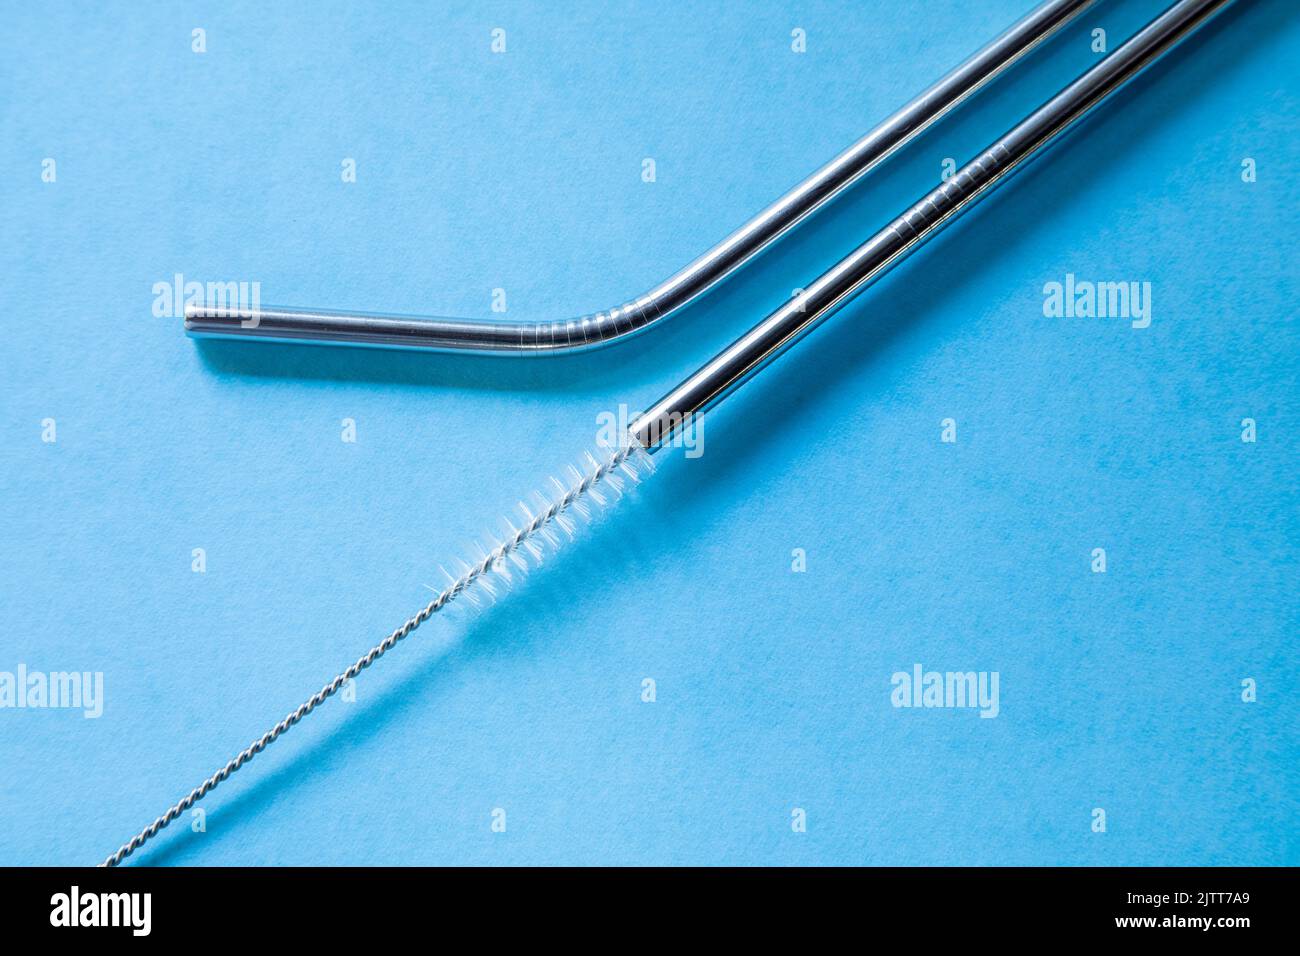 https://c8.alamy.com/comp/2JTT7A9/reusable-stainless-steel-straws-and-cleaning-brush-on-blue-background-eco-friendly-lifestyle-copy-space-top-view-flat-layout-2JTT7A9.jpg